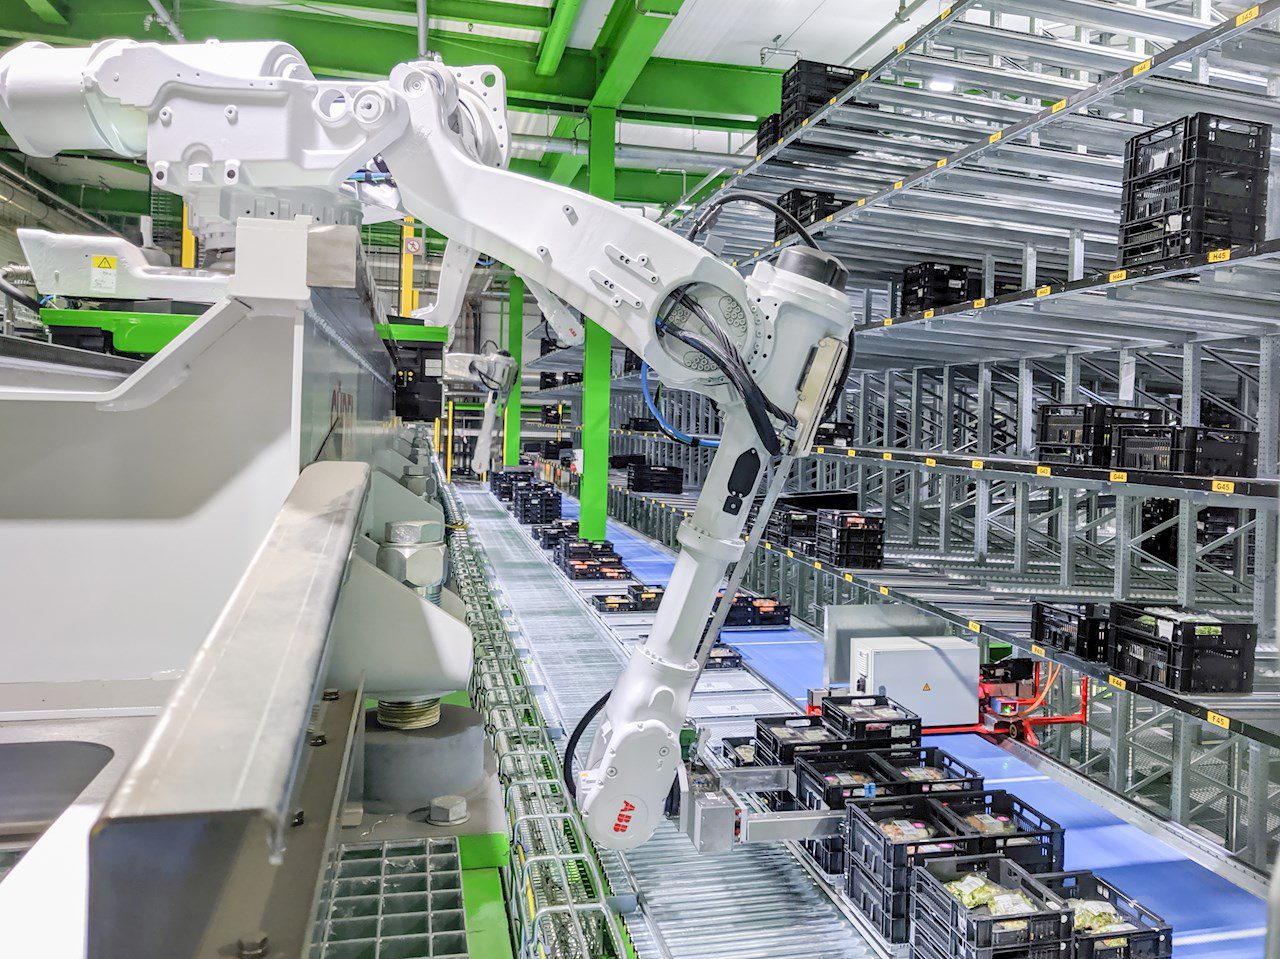 An ABB IRB 660 four-axis robot starts the product flow